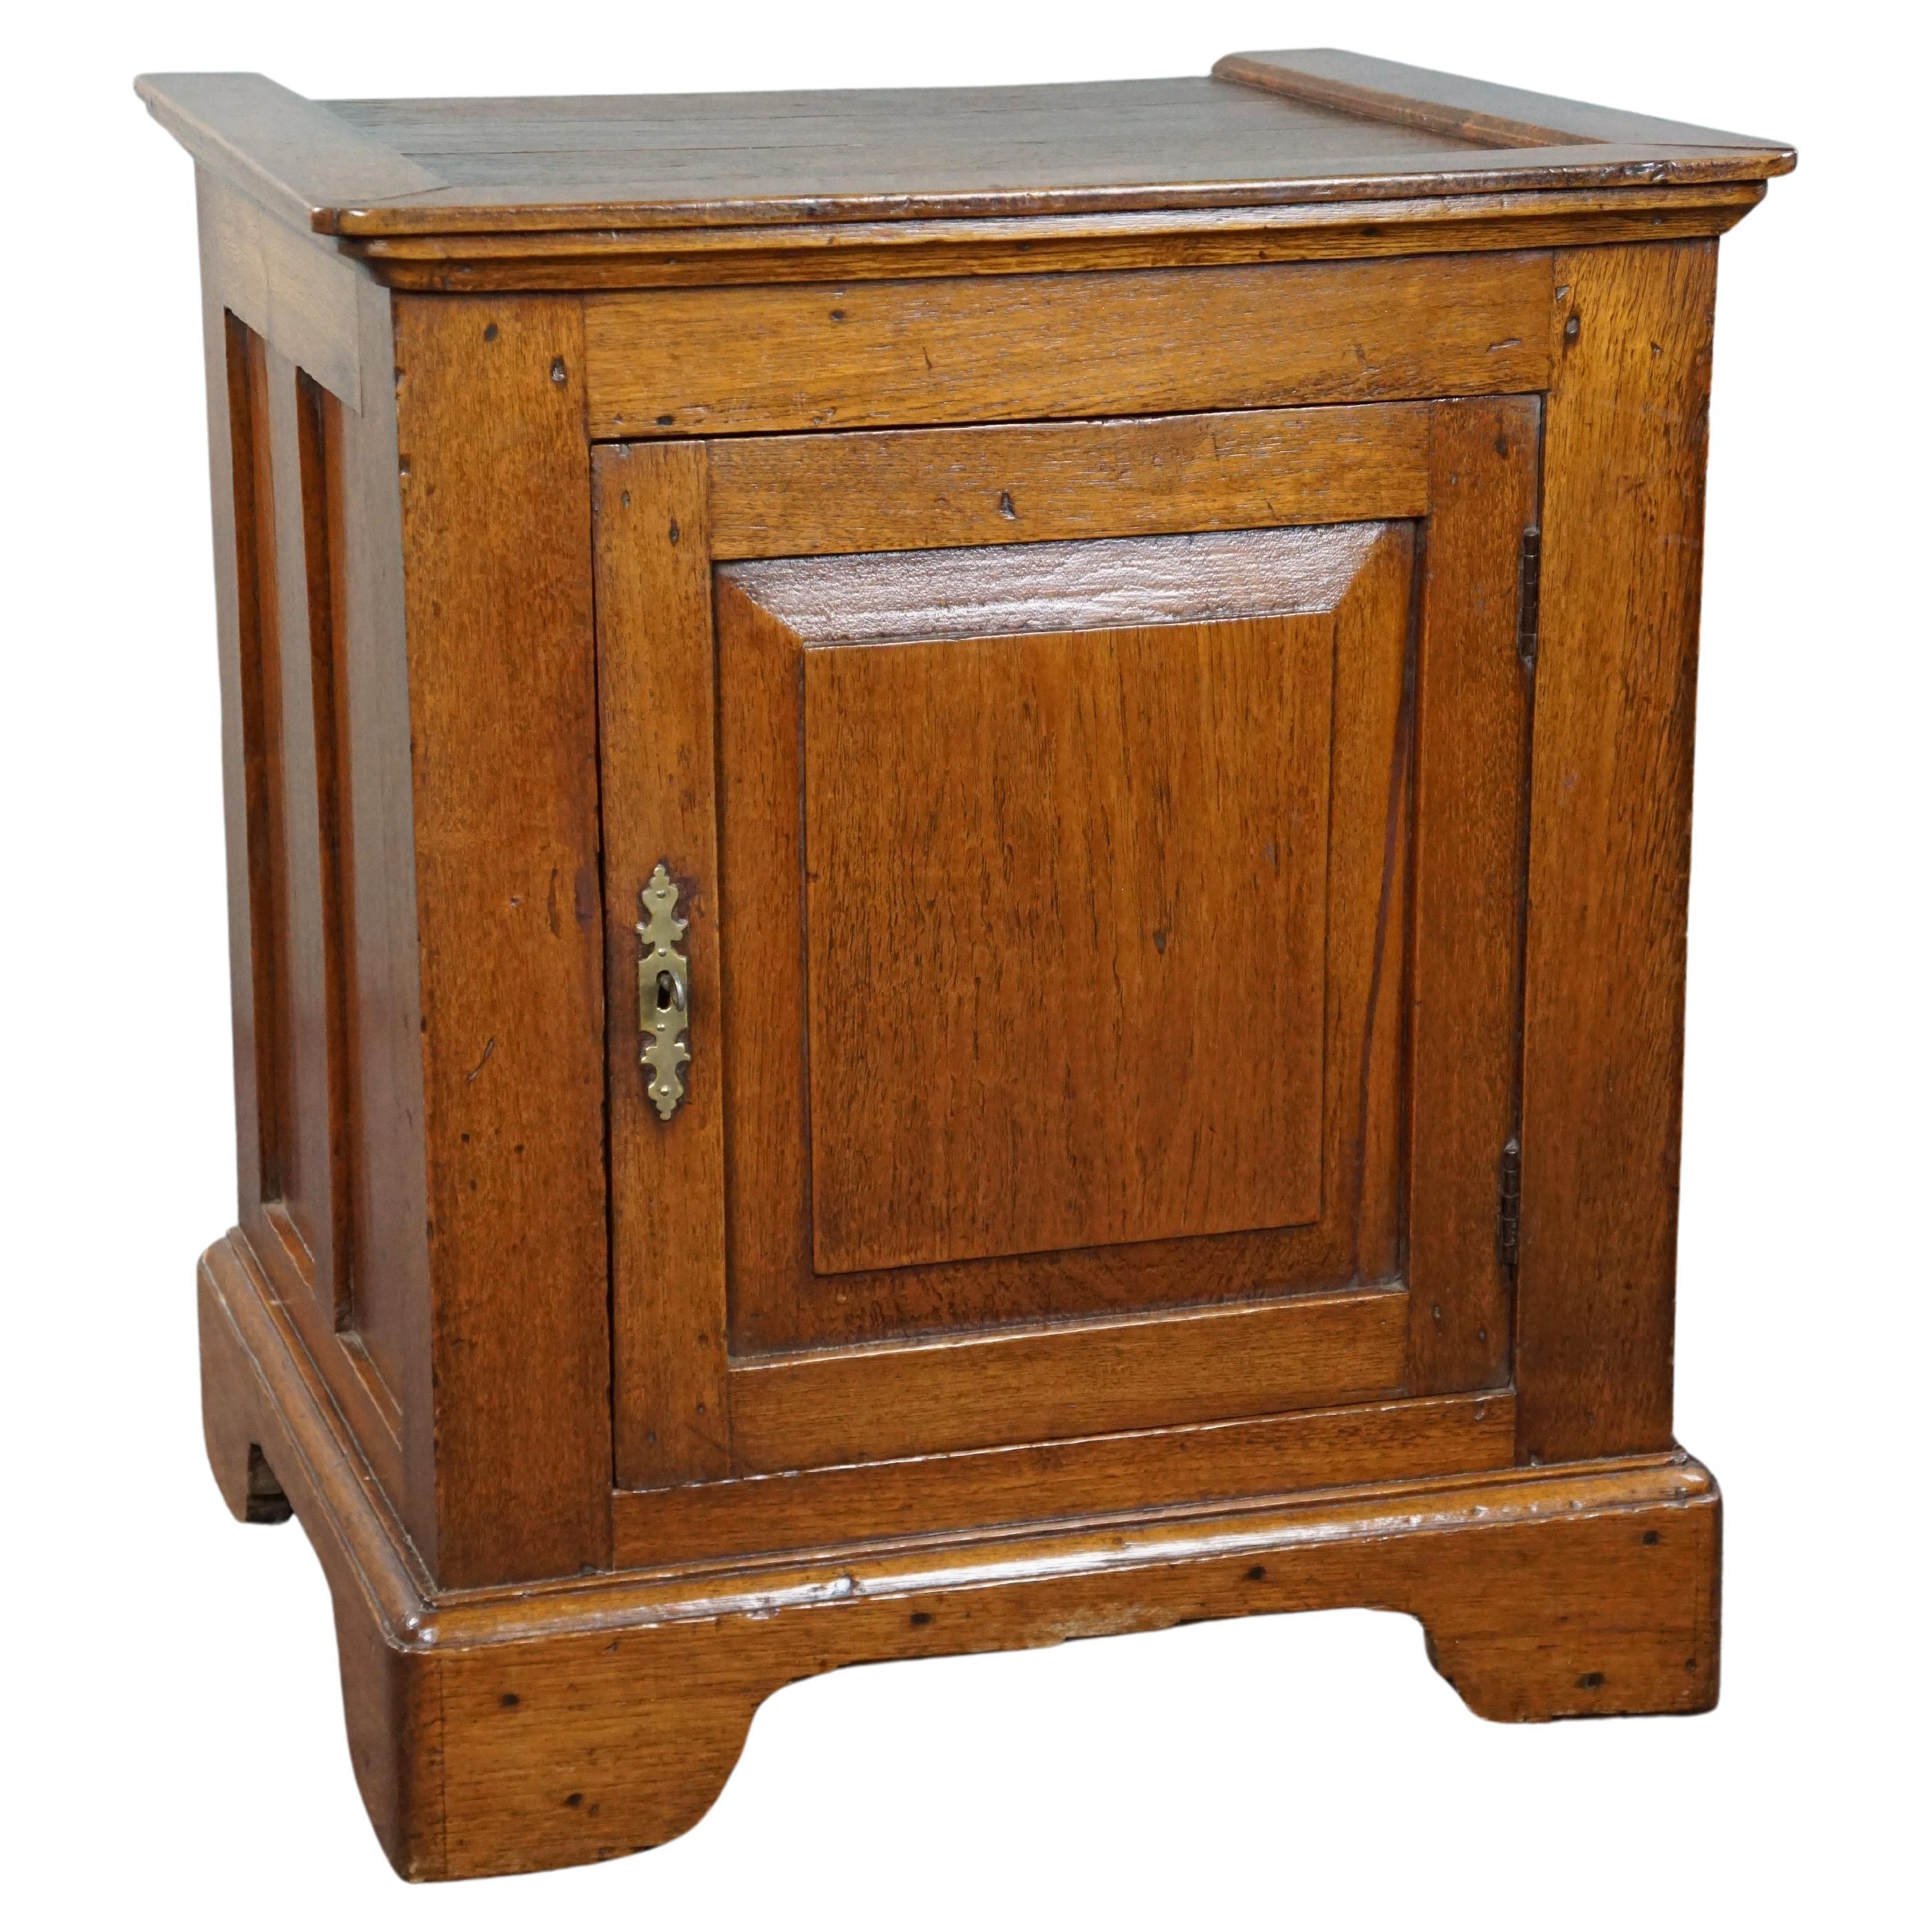 Antique English 1-door cabinet/side table, mid/late 19th century